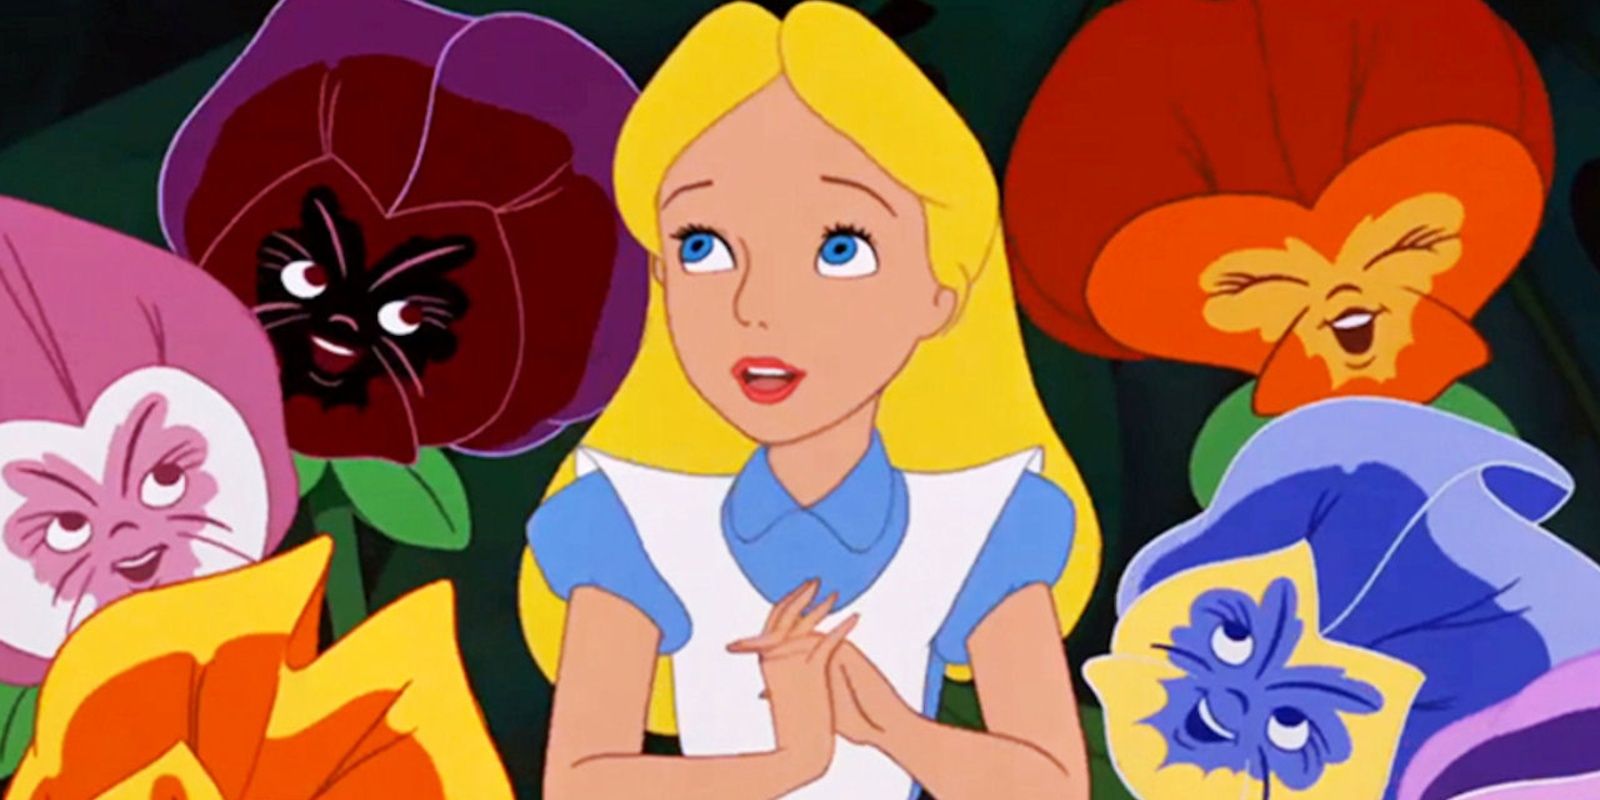 Alice singing with the flowers in Alice in Wonderland Cropped